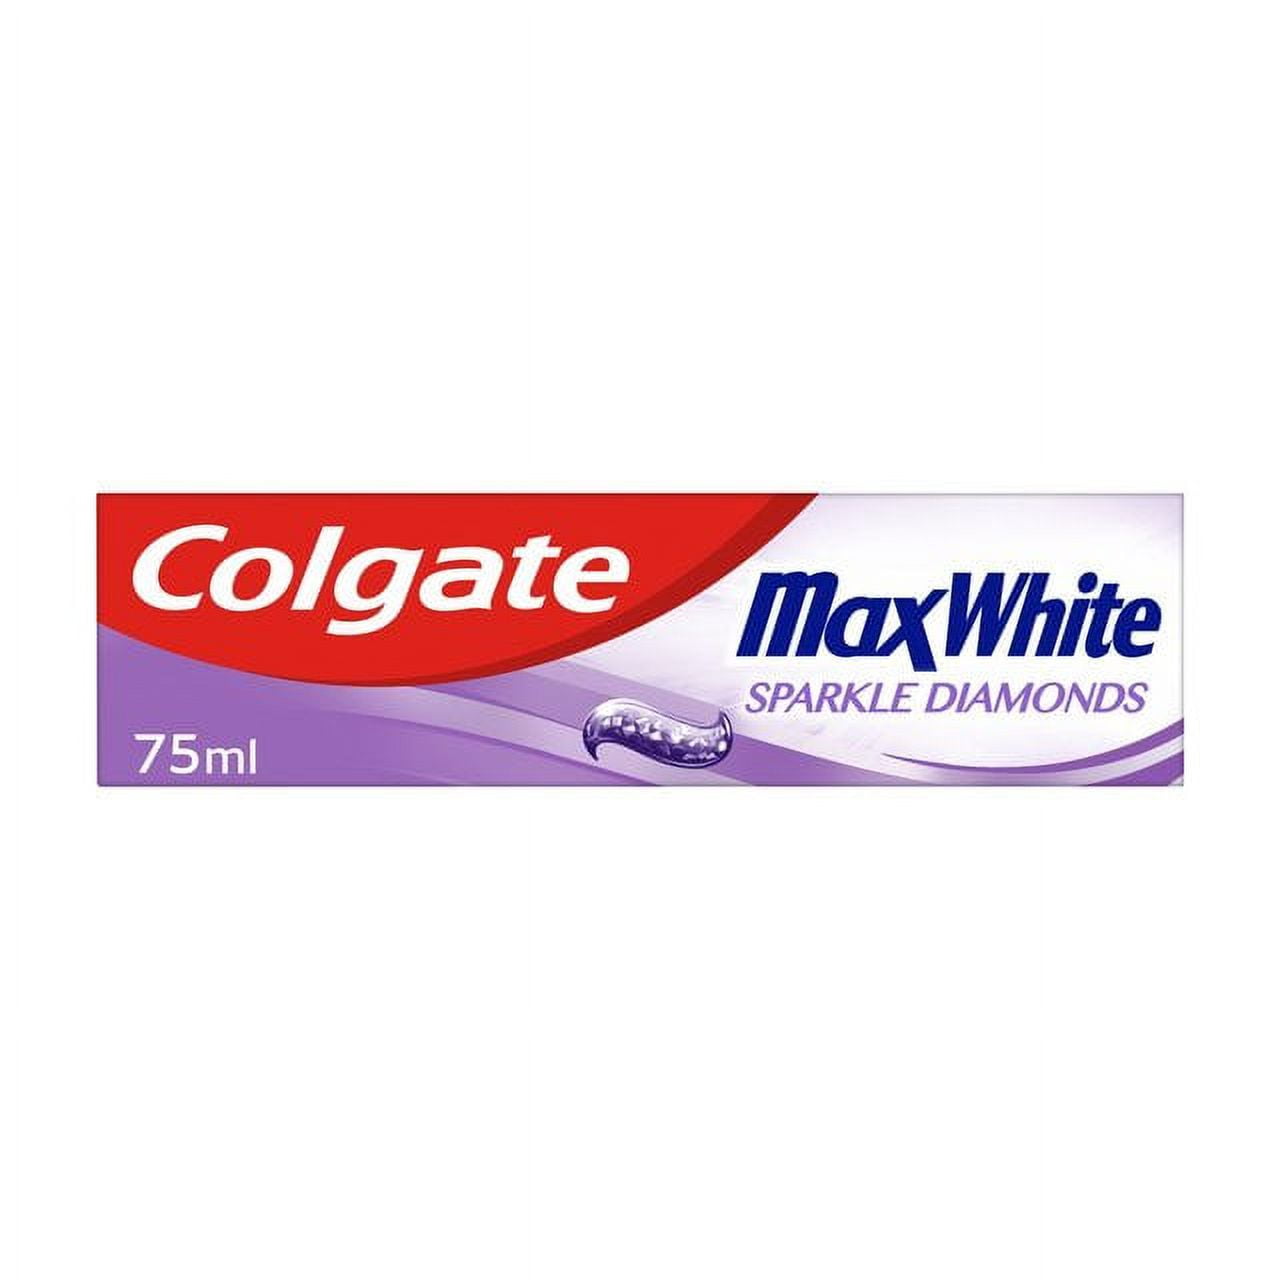 Colgate Max White Sparkle Diamonds Toothpaste 75ml- European Version NOT  North American Variety - Imported from United Kingdom by Sentogo - SOLD AS  A 2 PACK-DEL 